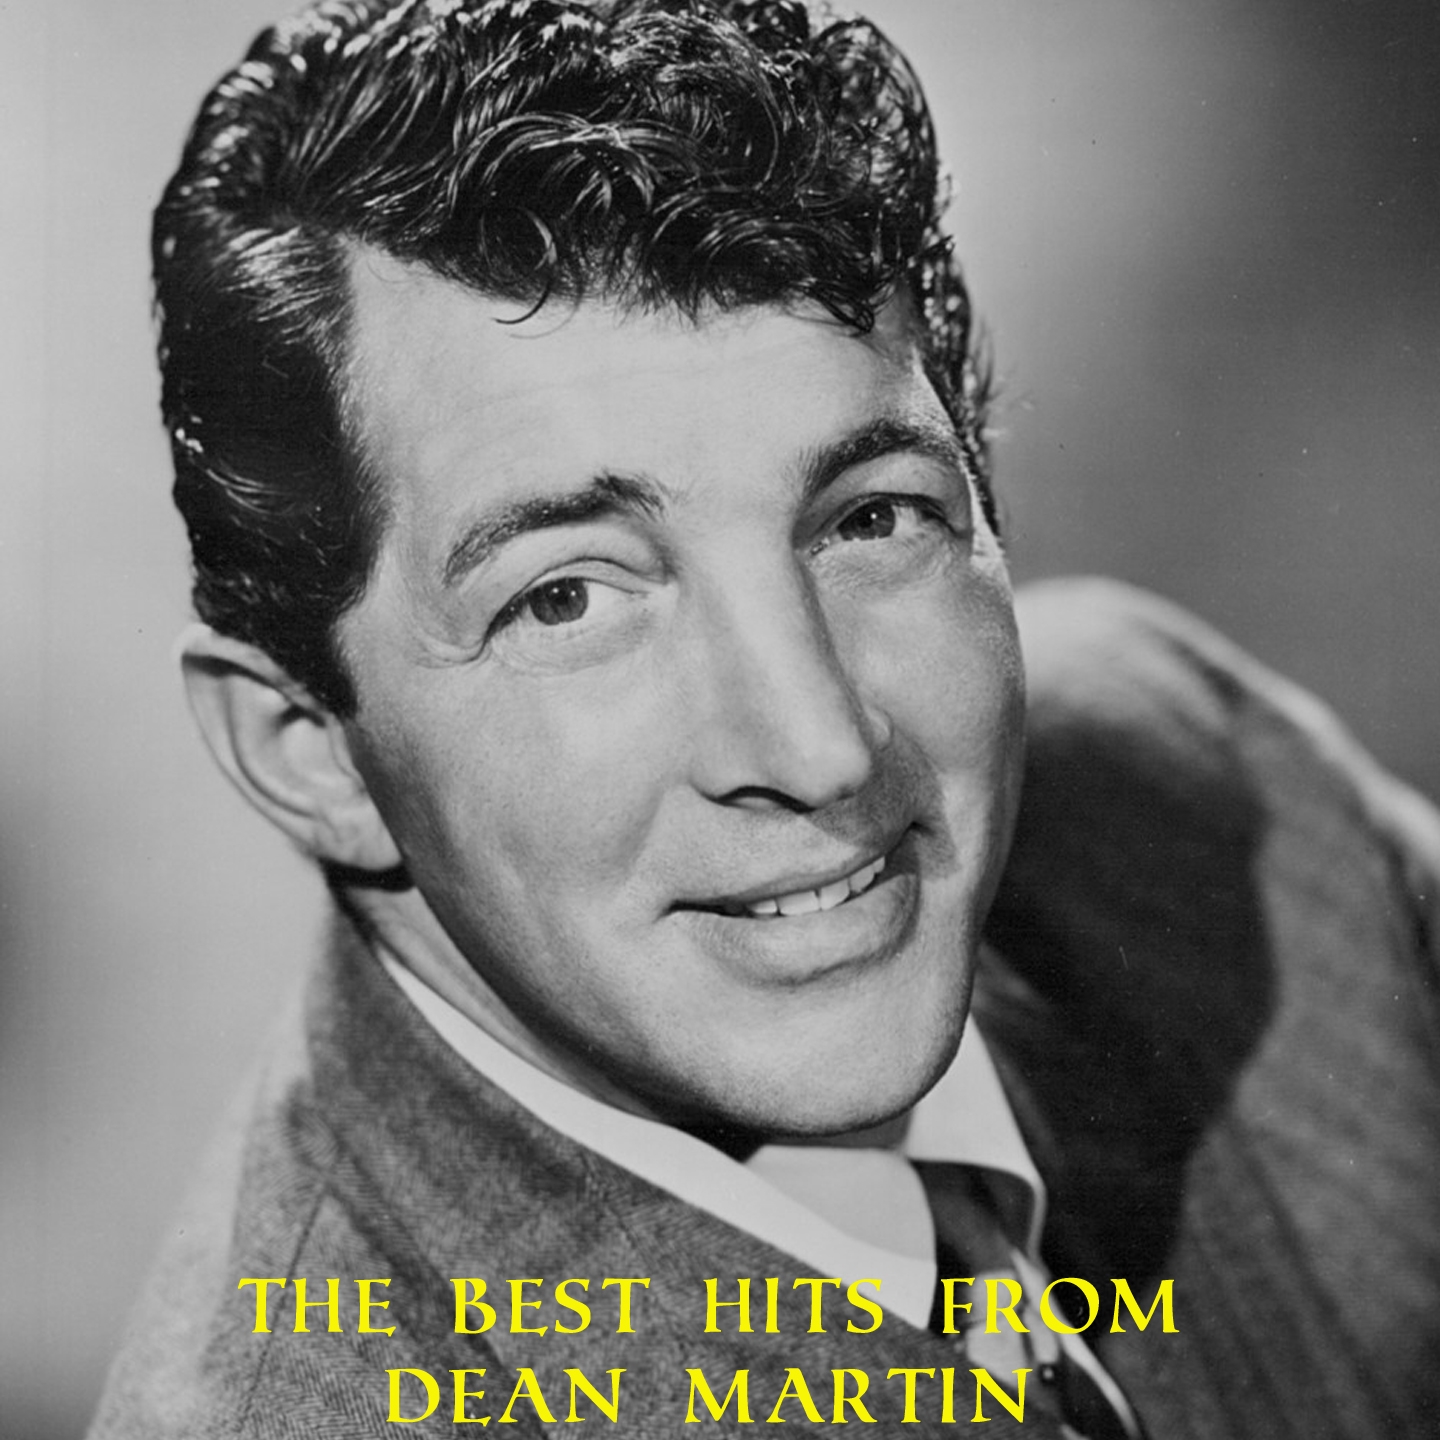 The Best Hits From Dean Martin